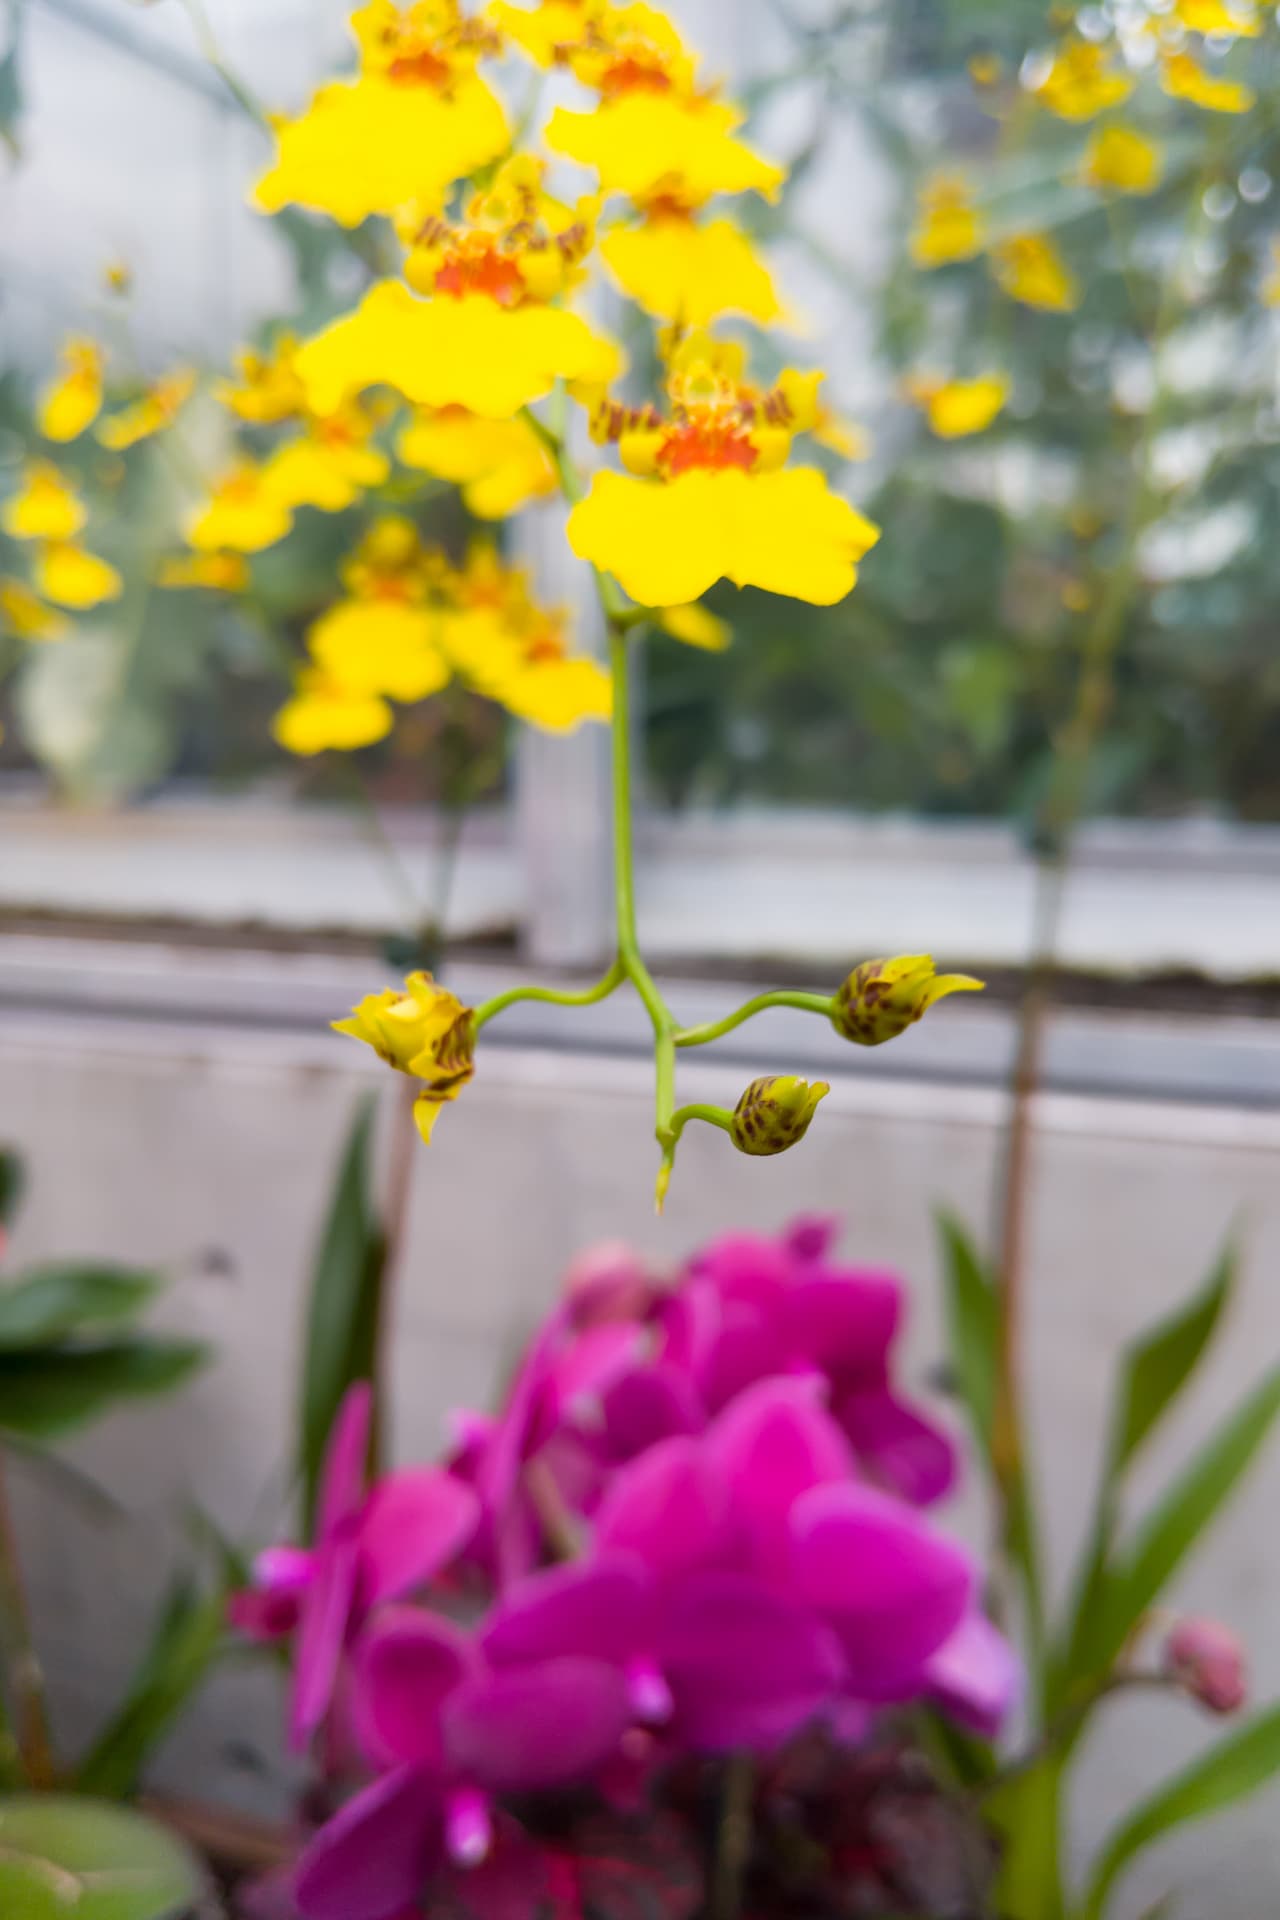 Three yellow and purple orchid flower buds at the end of a stem, about to bloom.